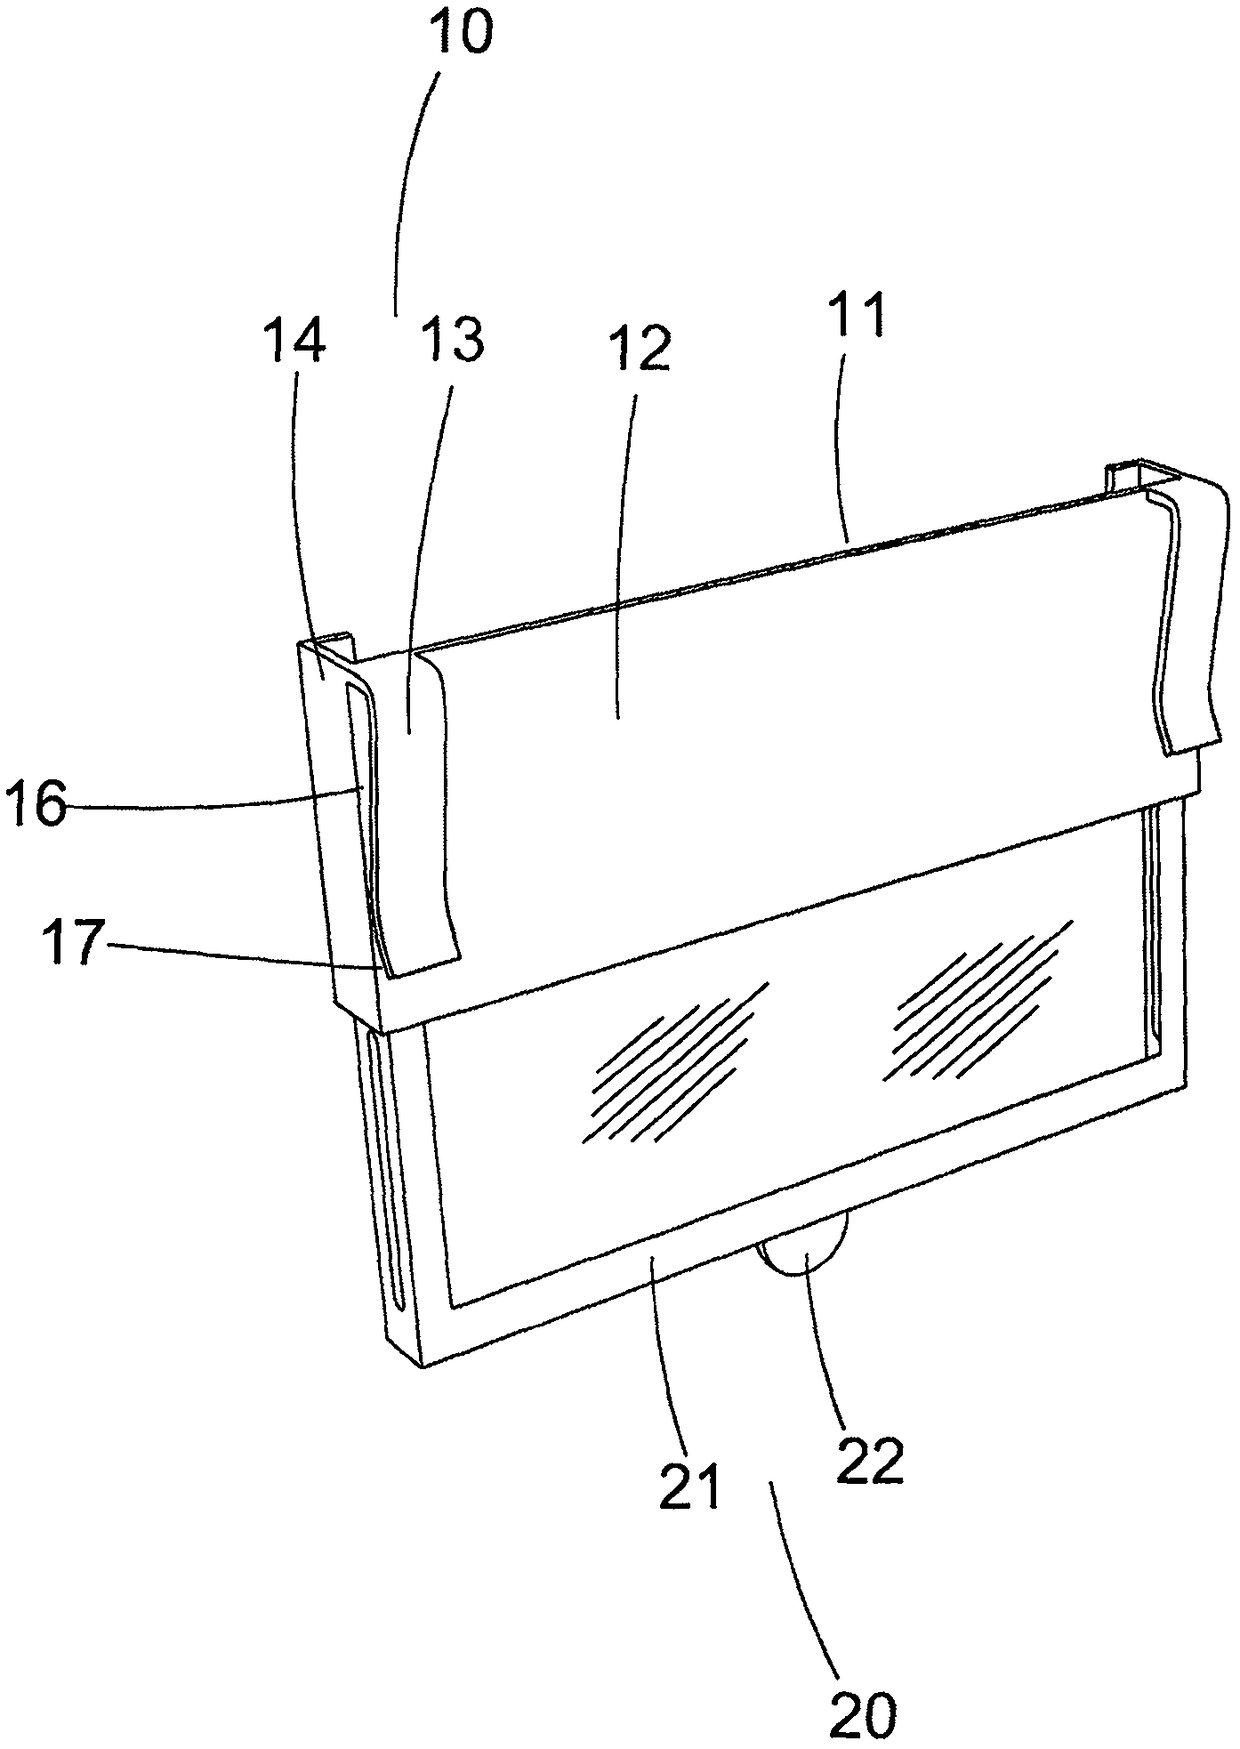 Navigation device suitable for being mounted on rearview mirror in vehicle